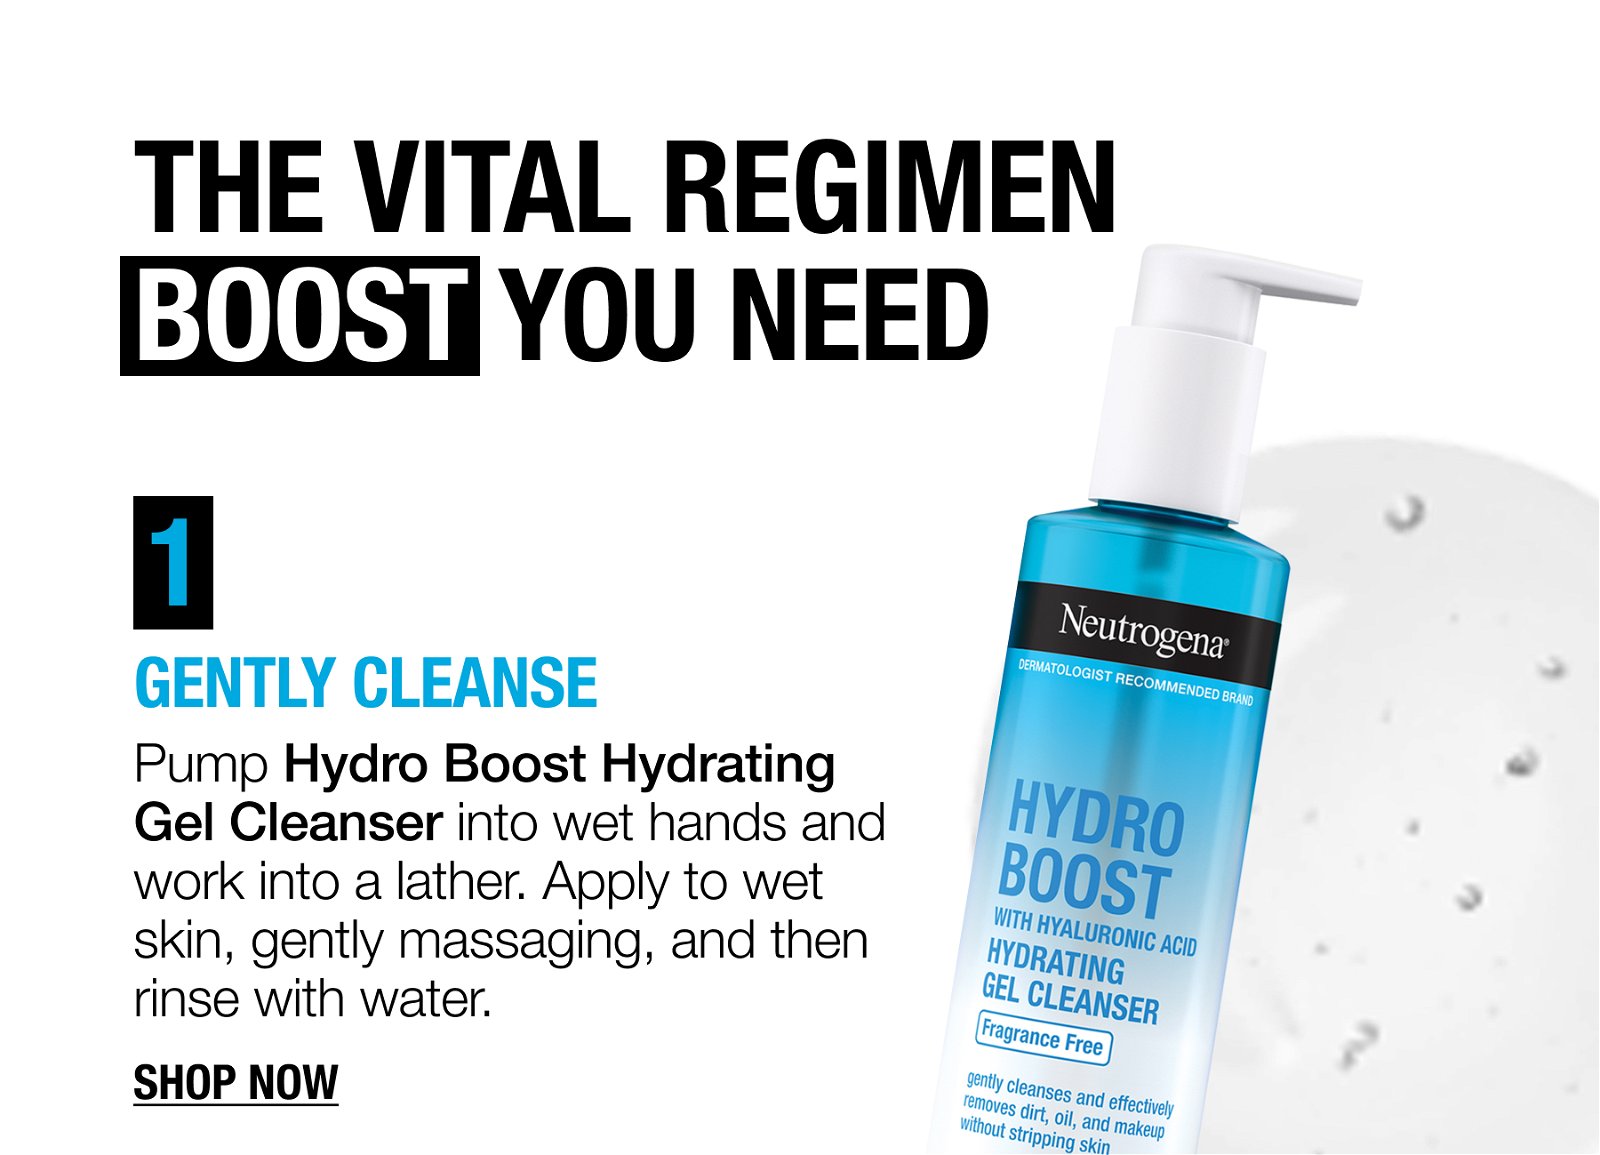 The Vital Regimen Boost You Need - 1 Gently Cleanse - Shop Now